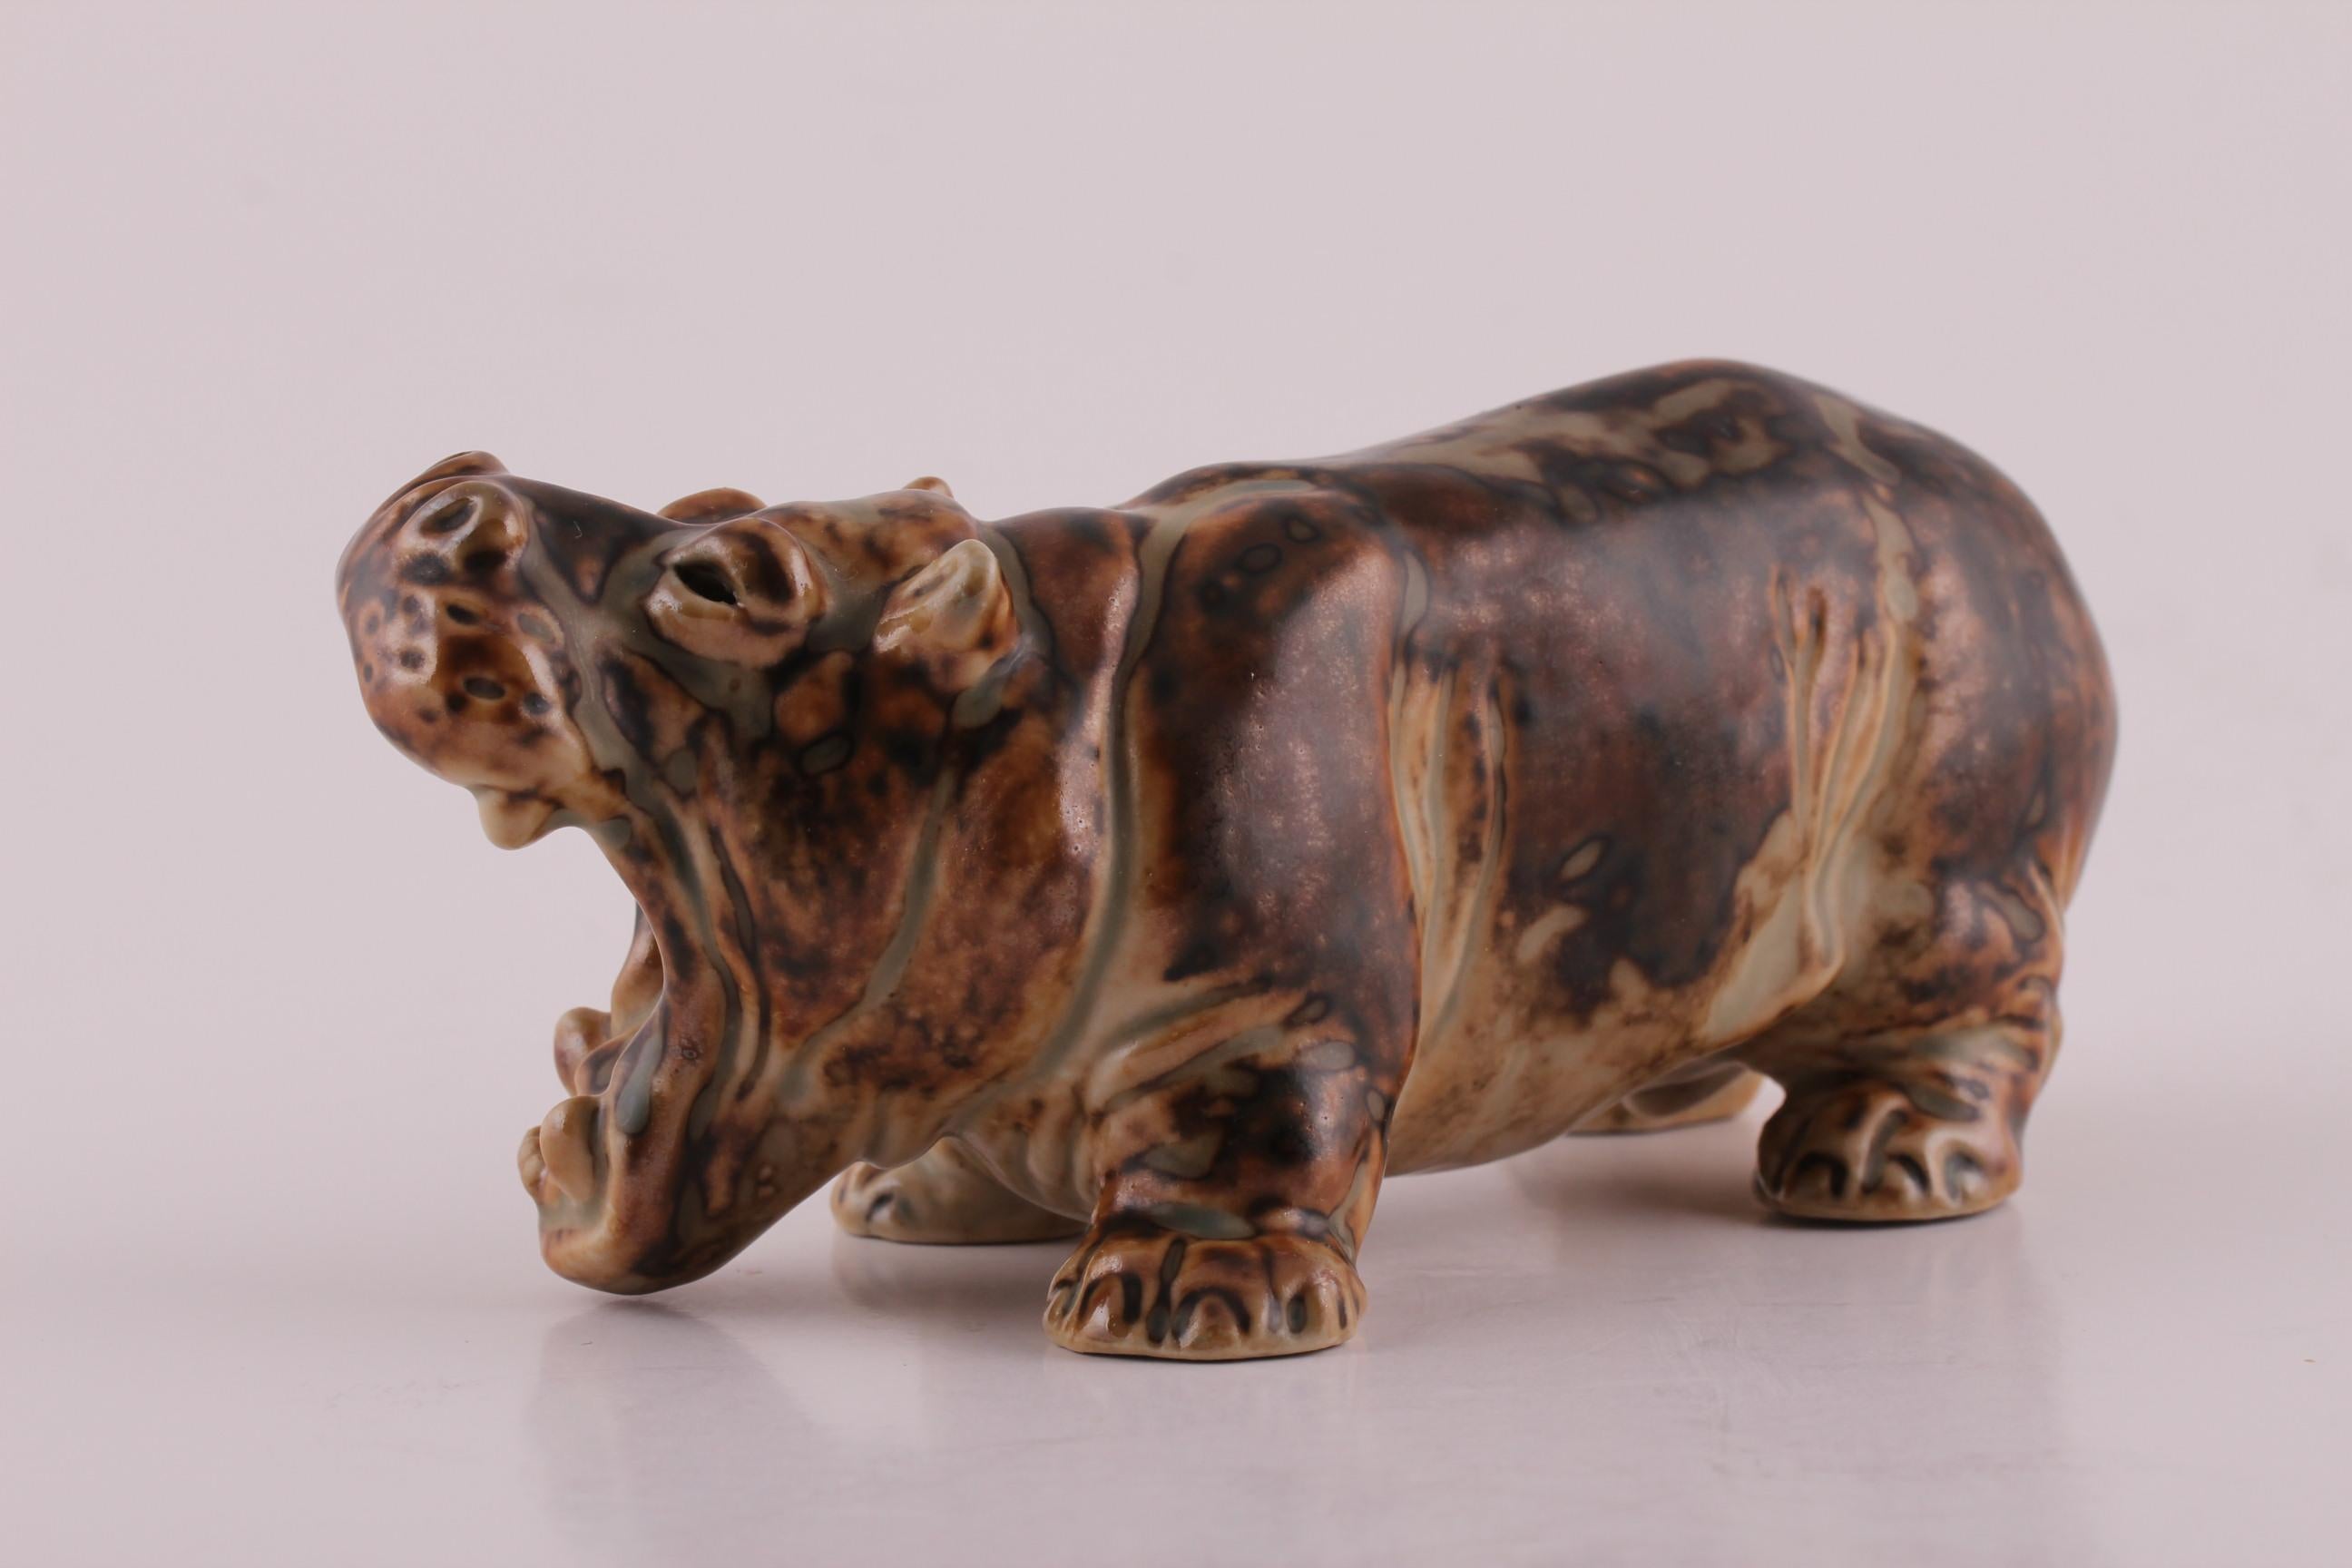 Danish stoneware figurine of a happy hippopotamus designed by Knud Kyhn (1880-1969) and manufactured by Royal Copenhagen. The design was first launched in 1930.

The figurine is decorated with a light and dark-brown Sung glaze. The Sung glaze was